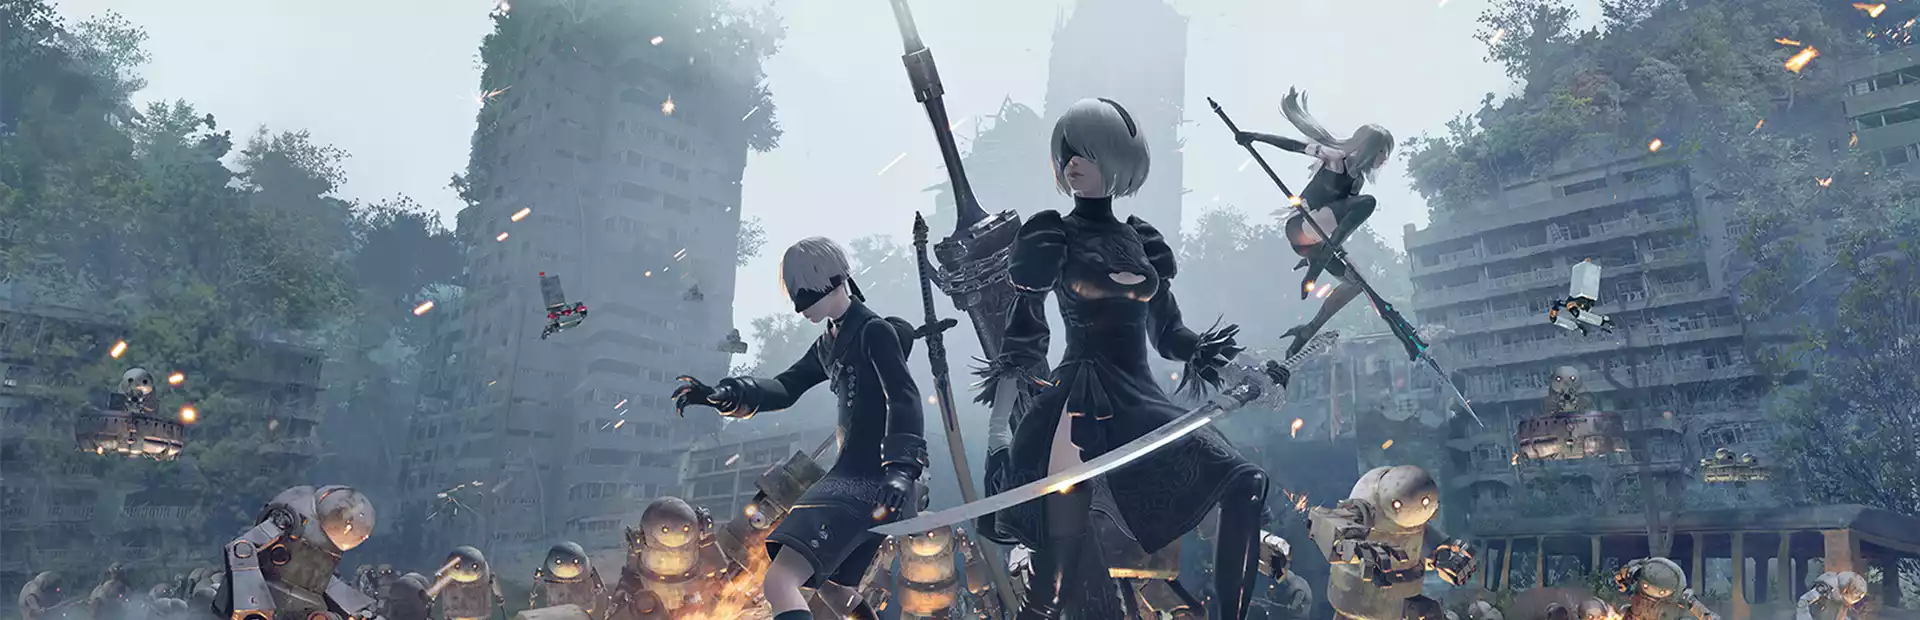 NieR:Automata Game of the YoRHa Edition Steam Key GLOBAL